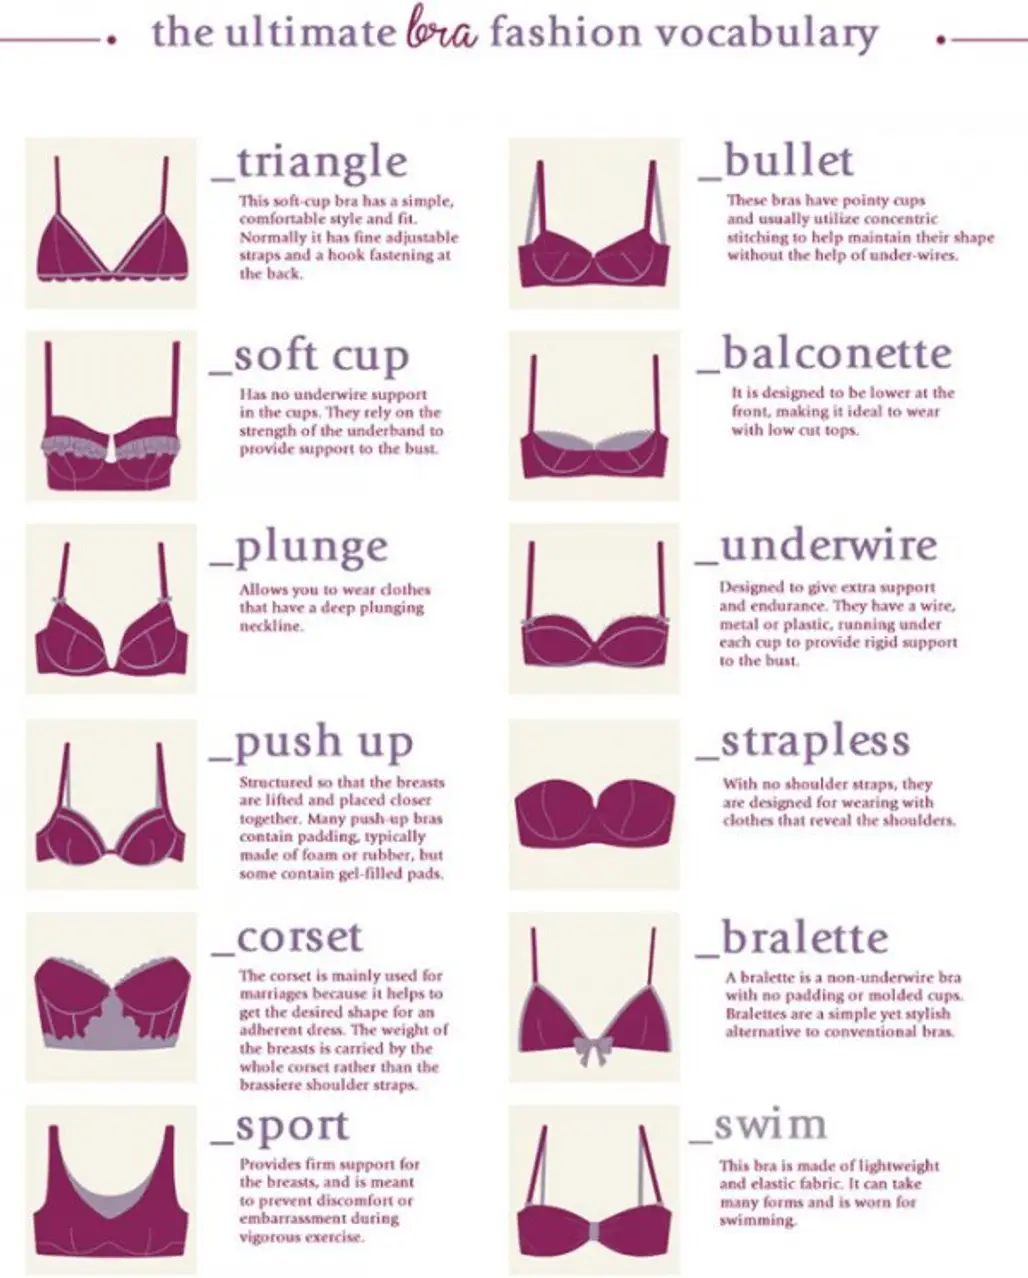 Types of Bra Designs - Sweet Skin Liners  Fashion vocabulary, Bra types,  Fashion terms